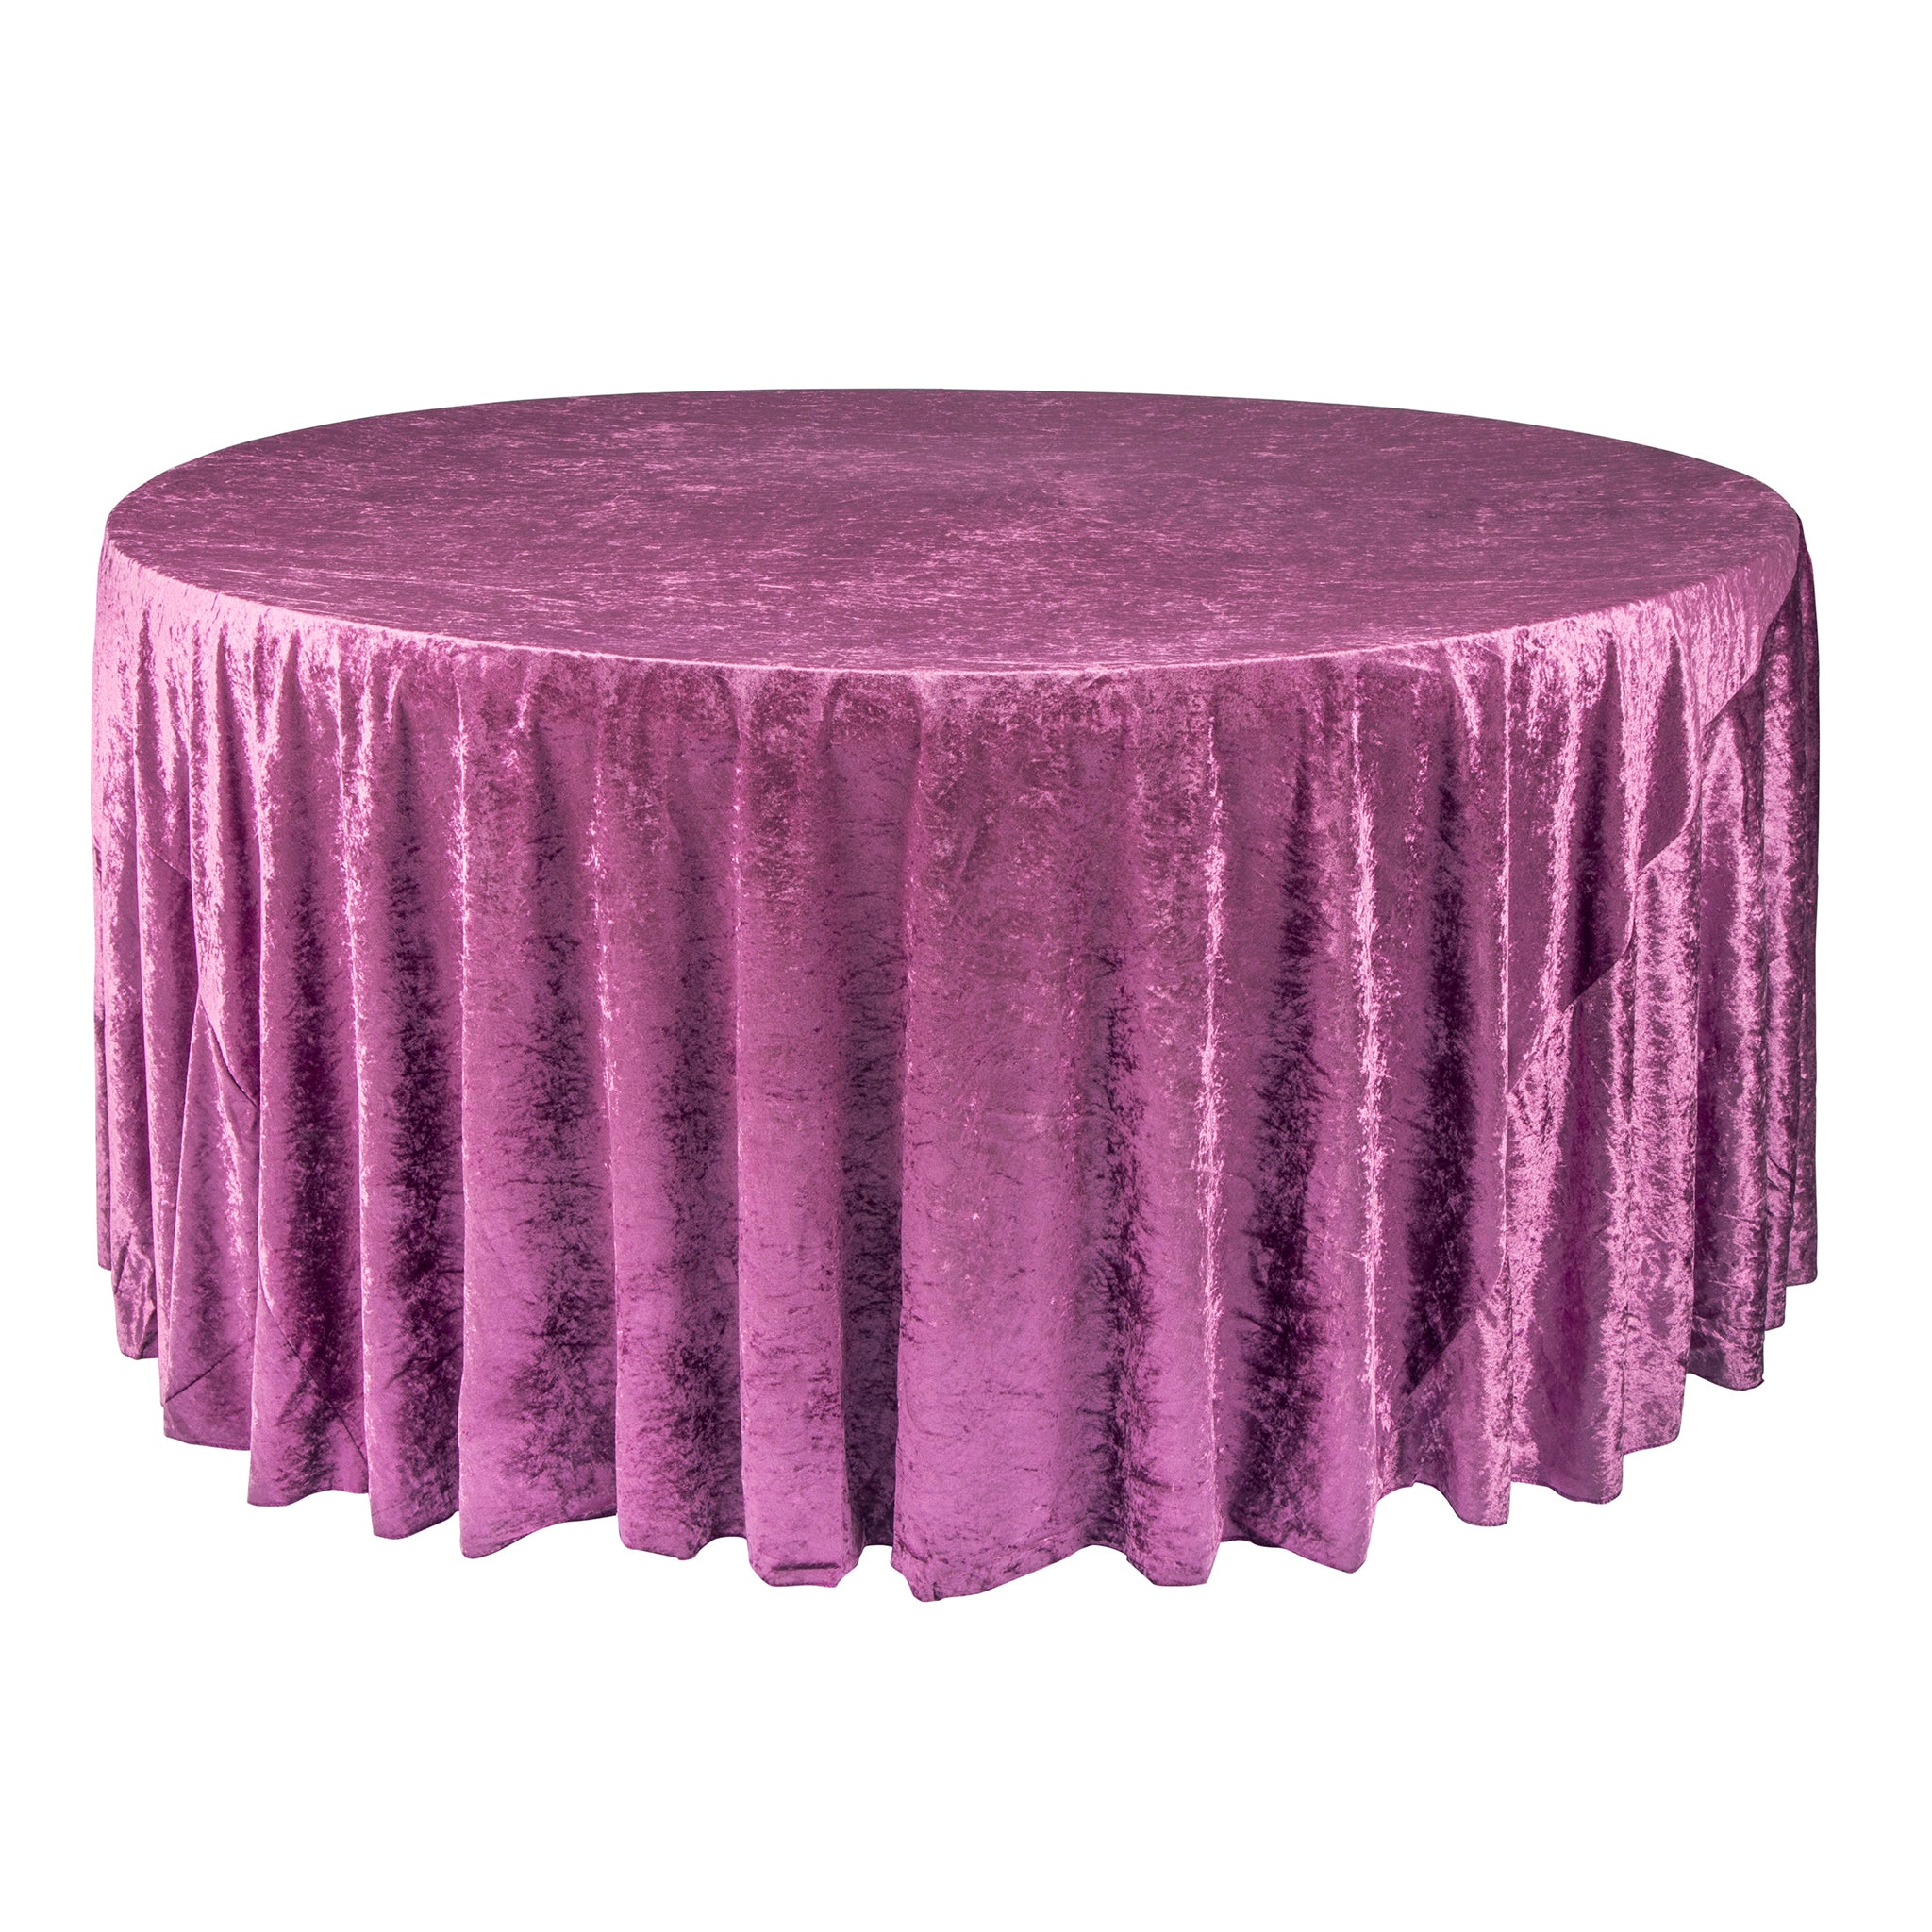 Velvet 132 Round Tablecloth - Coral